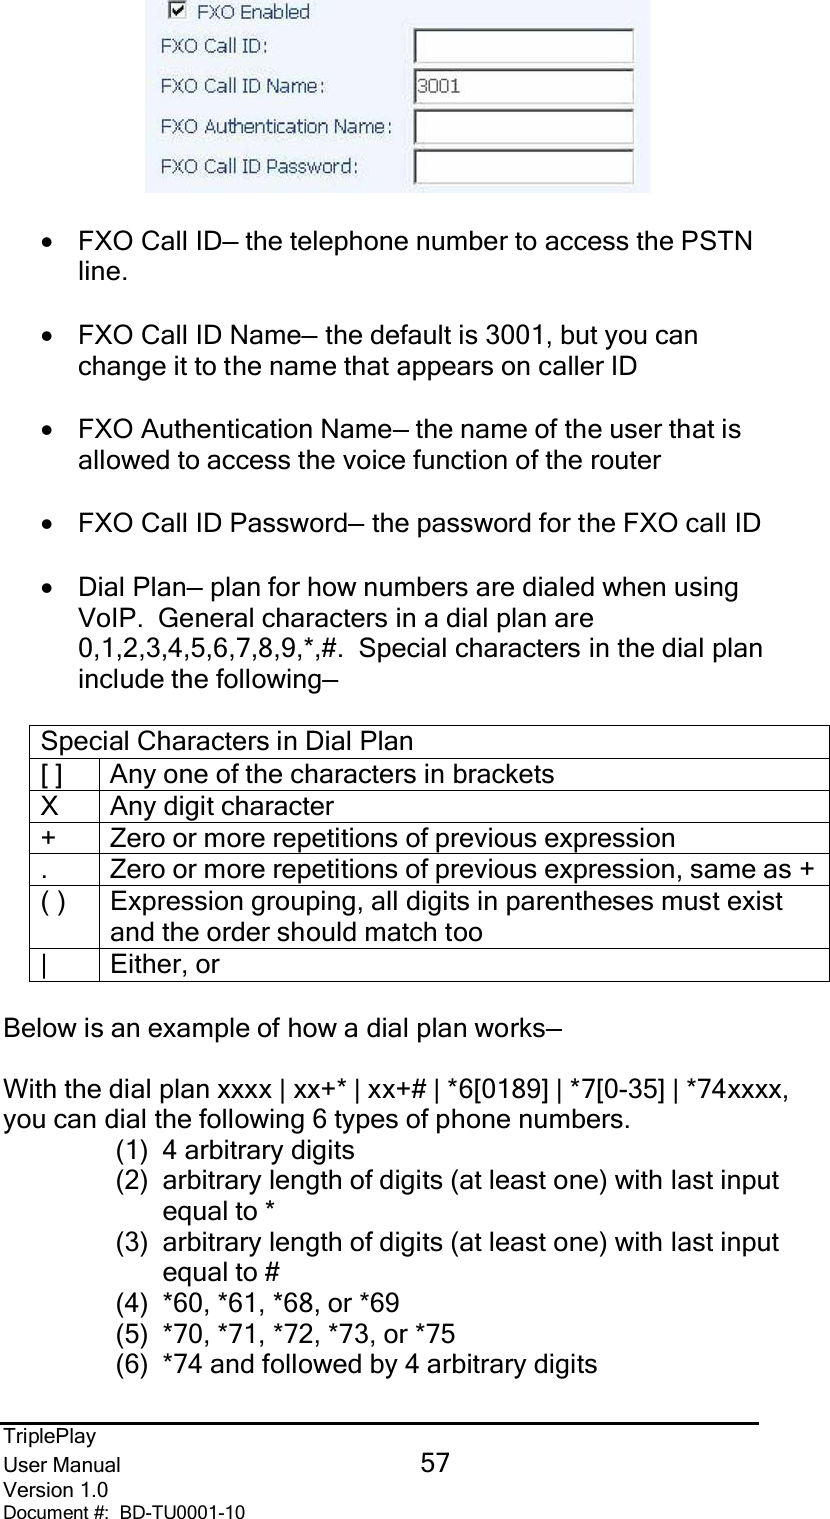 TriplePlayUser Manual 57Version 1.0Document #:  BD-TU0001-10•FXO Call ID— the telephone number to access the PSTNline.•FXO Call ID Name— the default is 3001, but you canchange it to the name that appears on caller ID•FXO Authentication Name— the name of the user that isallowed to access the voice function of the router•FXO Call ID Password— the password for the FXO call ID•Dial Plan— plan for how numbers are dialed when usingVoIP.  General characters in a dial plan are0,1,2,3,4,5,6,7,8,9,*,#.  Special characters in the dial planinclude the following—Special Characters in Dial Plan[ ]  Any one of the characters in bracketsX Any digit character+  Zero or more repetitions of previous expression.  Zero or more repetitions of previous expression, same as +( )  Expression grouping, all digits in parentheses must existand the order should match too| Either, orBelow is an example of how a dial plan works—With the dial plan xxxx | xx+* | xx+# | *6[0189] | *7[0-35] | *74xxxx,you can dial the following 6 types of phone numbers.(1) 4 arbitrary digits(2)  arbitrary length of digits (at least one) with last inputequal to *(3)  arbitrary length of digits (at least one) with last inputequal to #(4)  *60, *61, *68, or *69(5)  *70, *71, *72, *73, or *75(6)  *74 and followed by 4 arbitrary digits